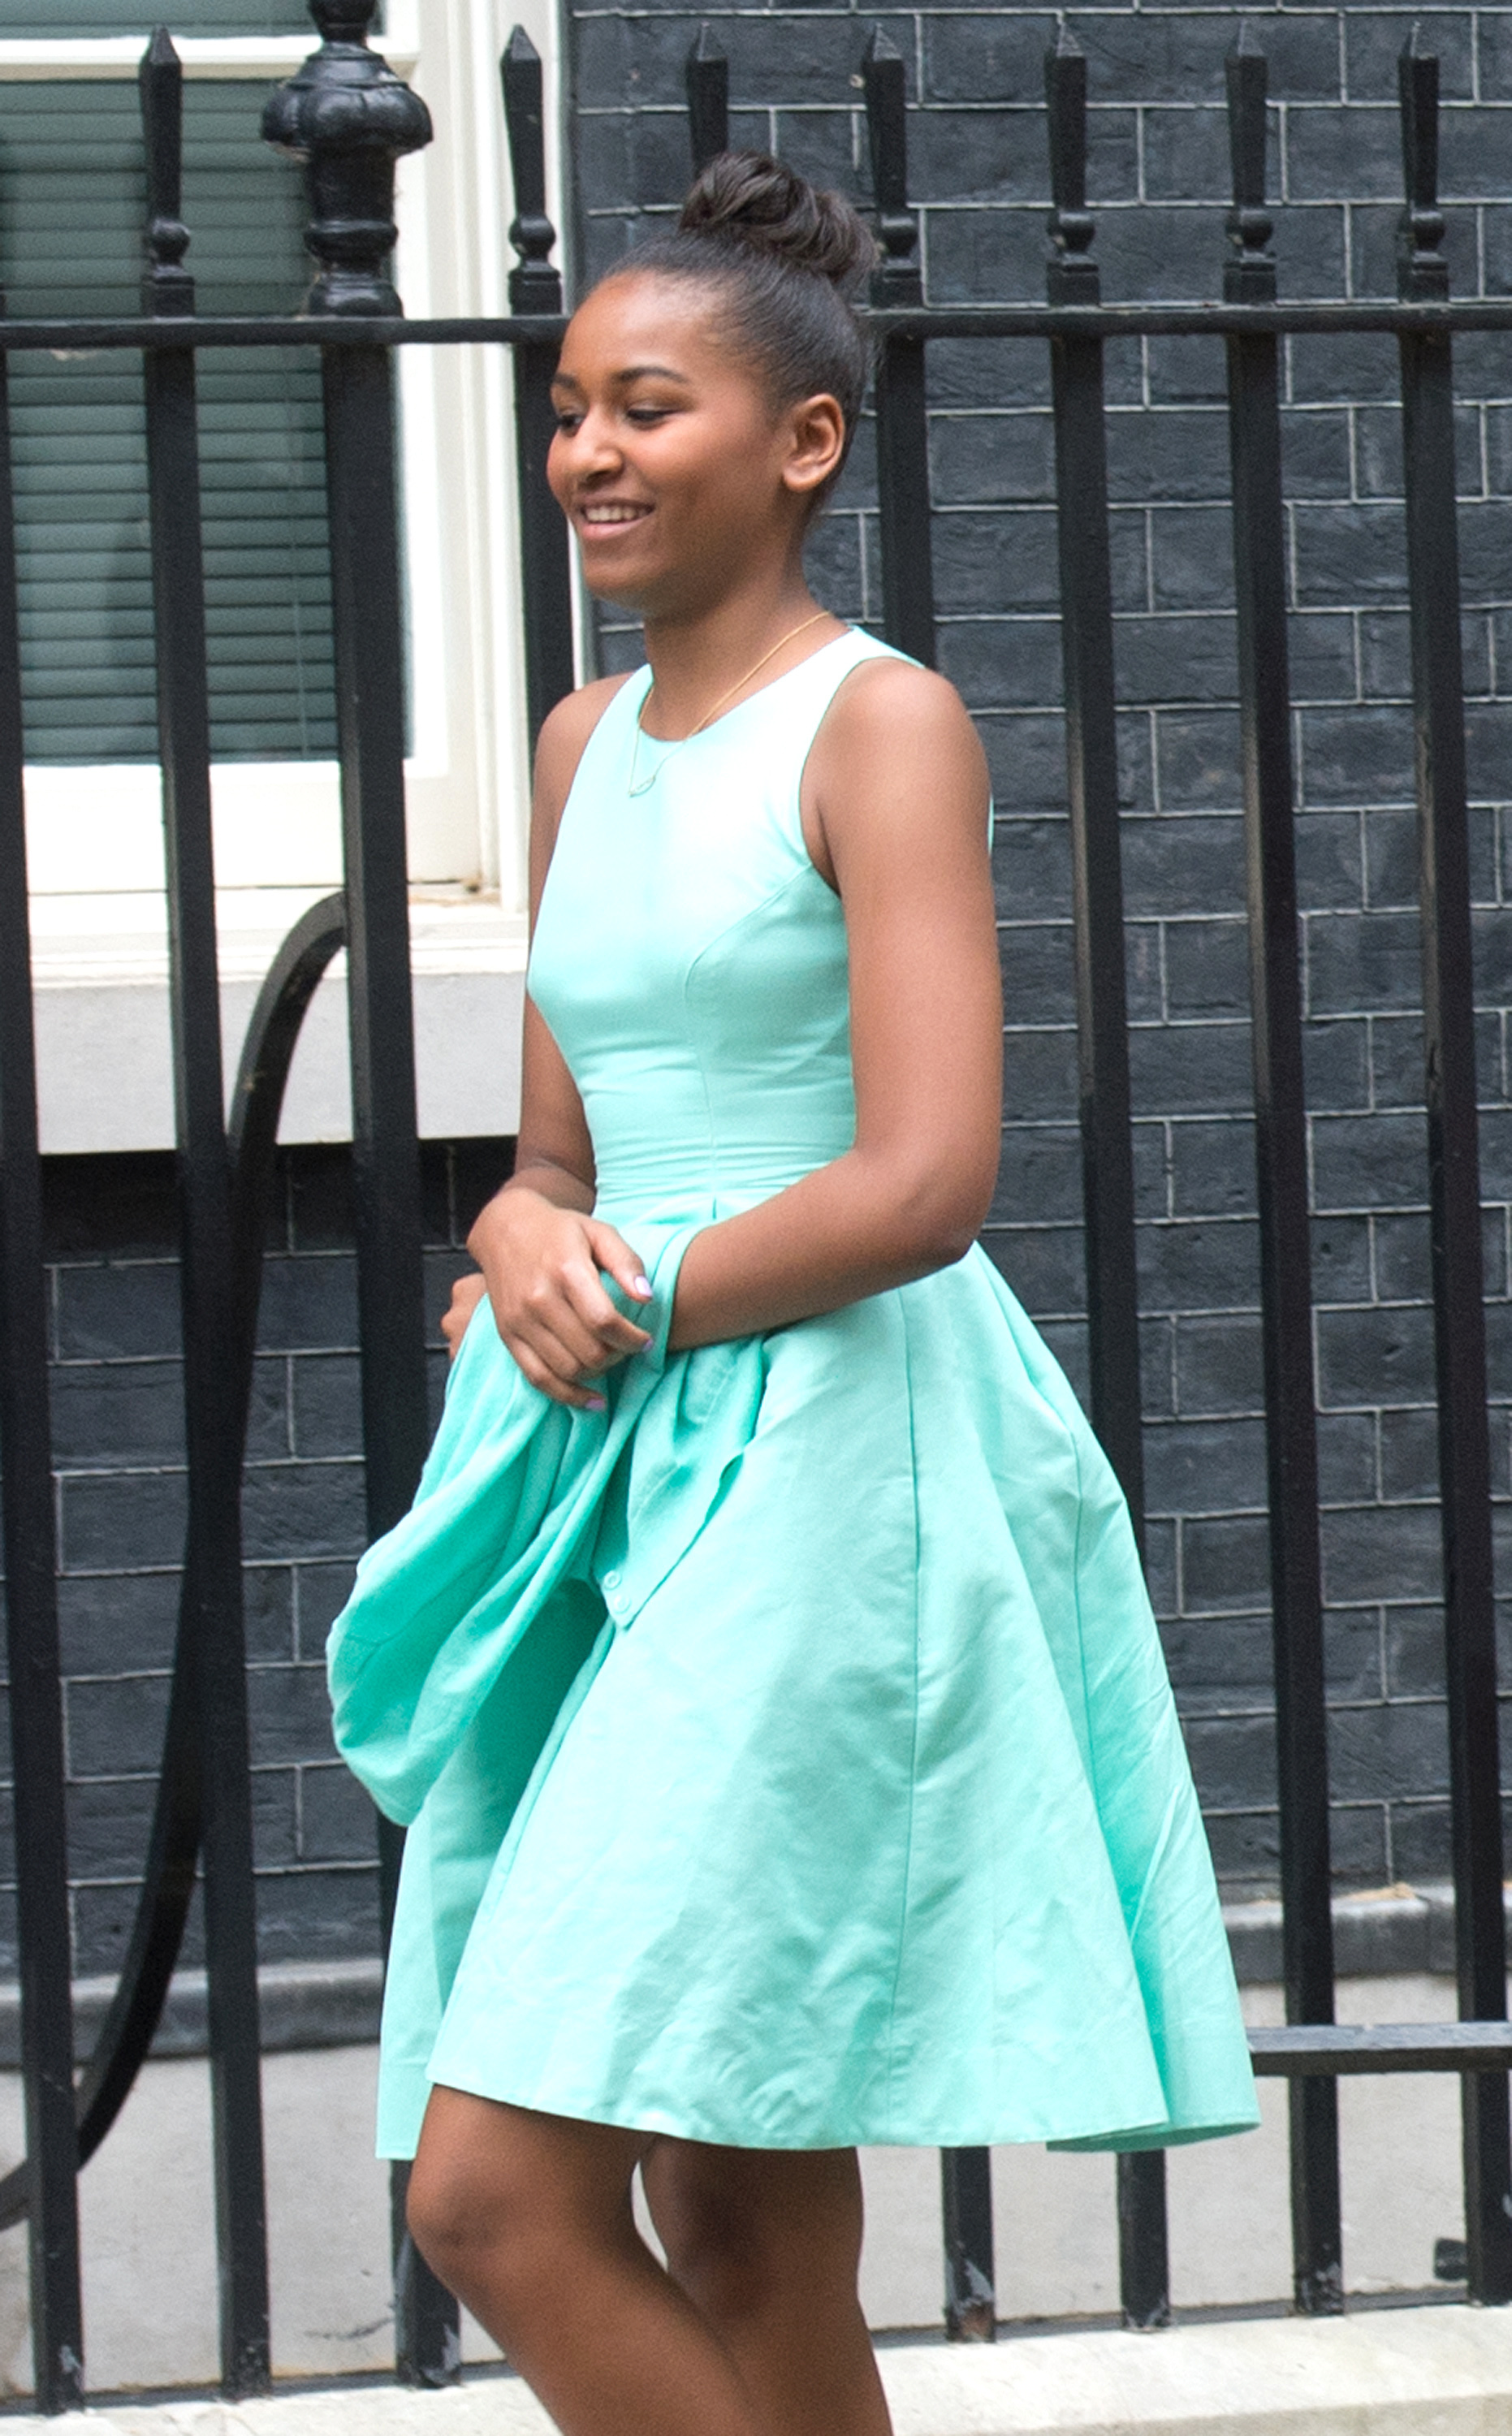 UK - Michelle Obama Visits 10 Downing Street in London